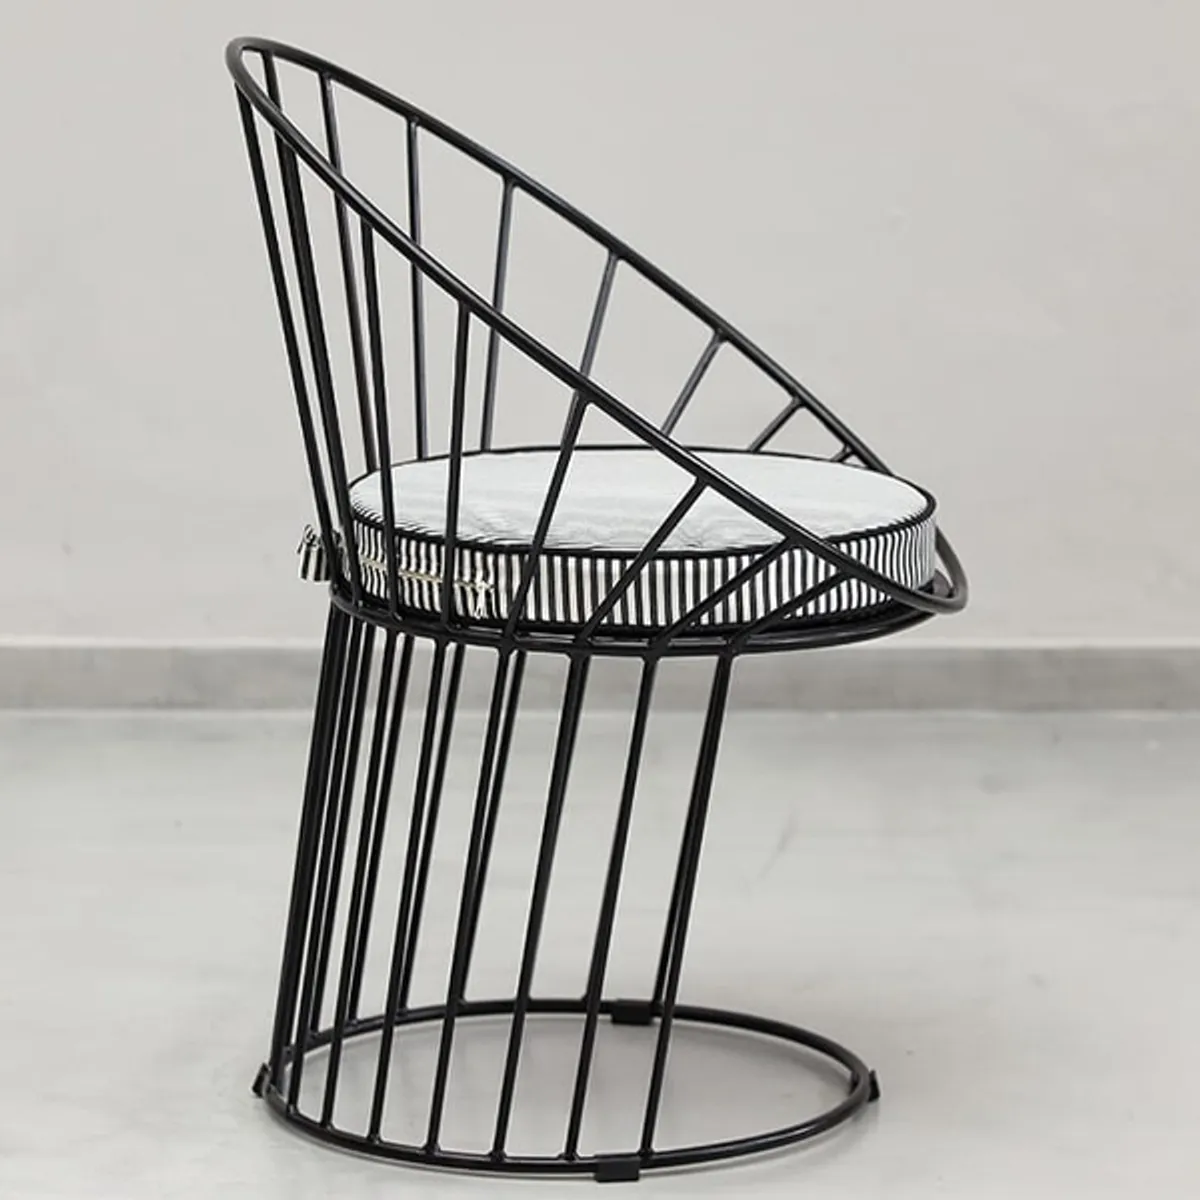 Illume armchair Inside Out Contracts